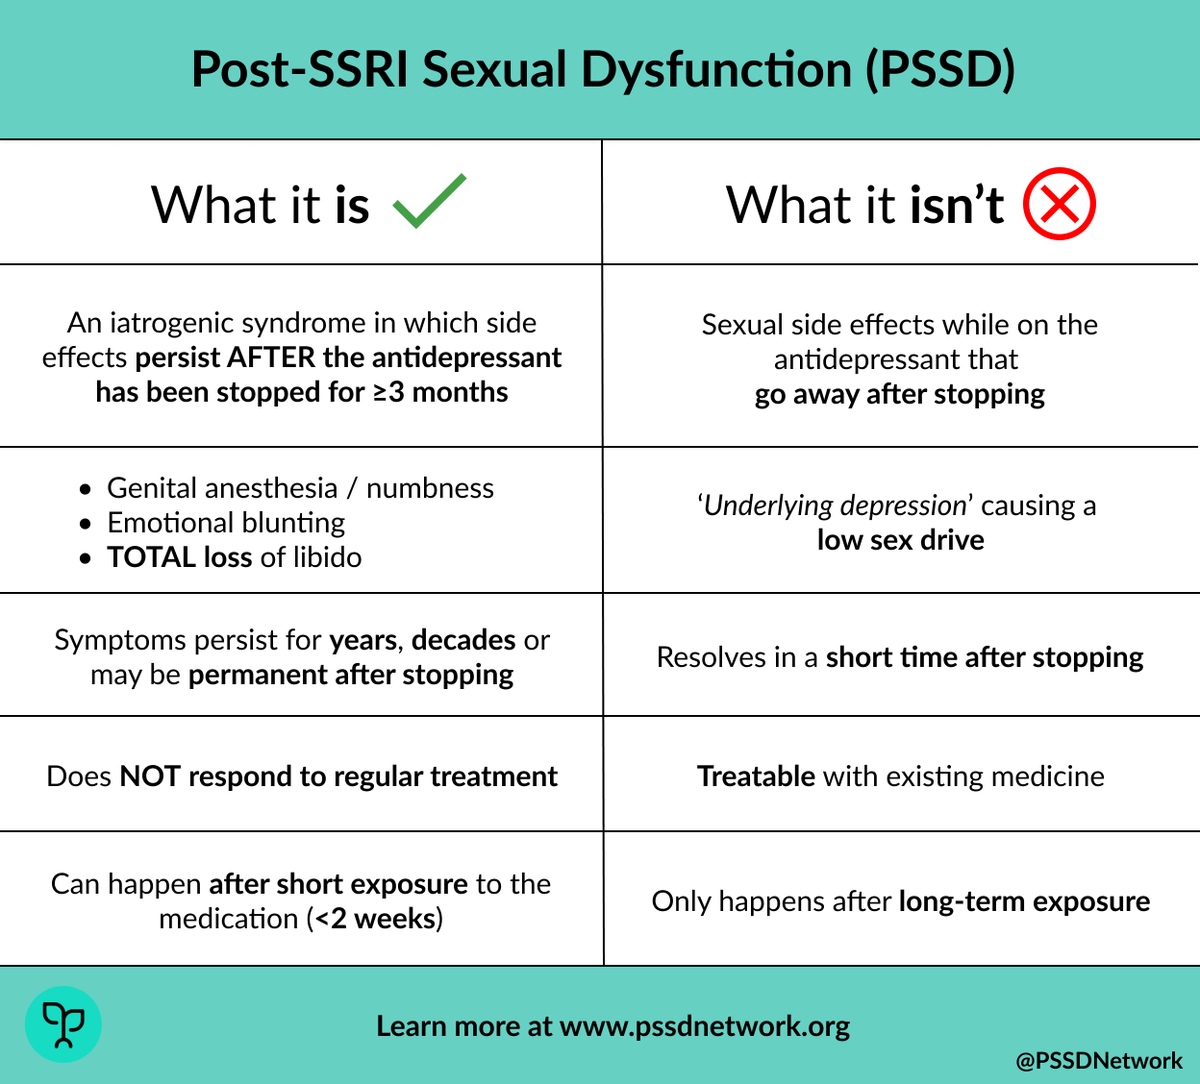 Post-SSRI Sexual Dysfunction is commonly misunderstood, even by people who experience it. The following infograph should help explain #PSSD to those who are not familiar with it.